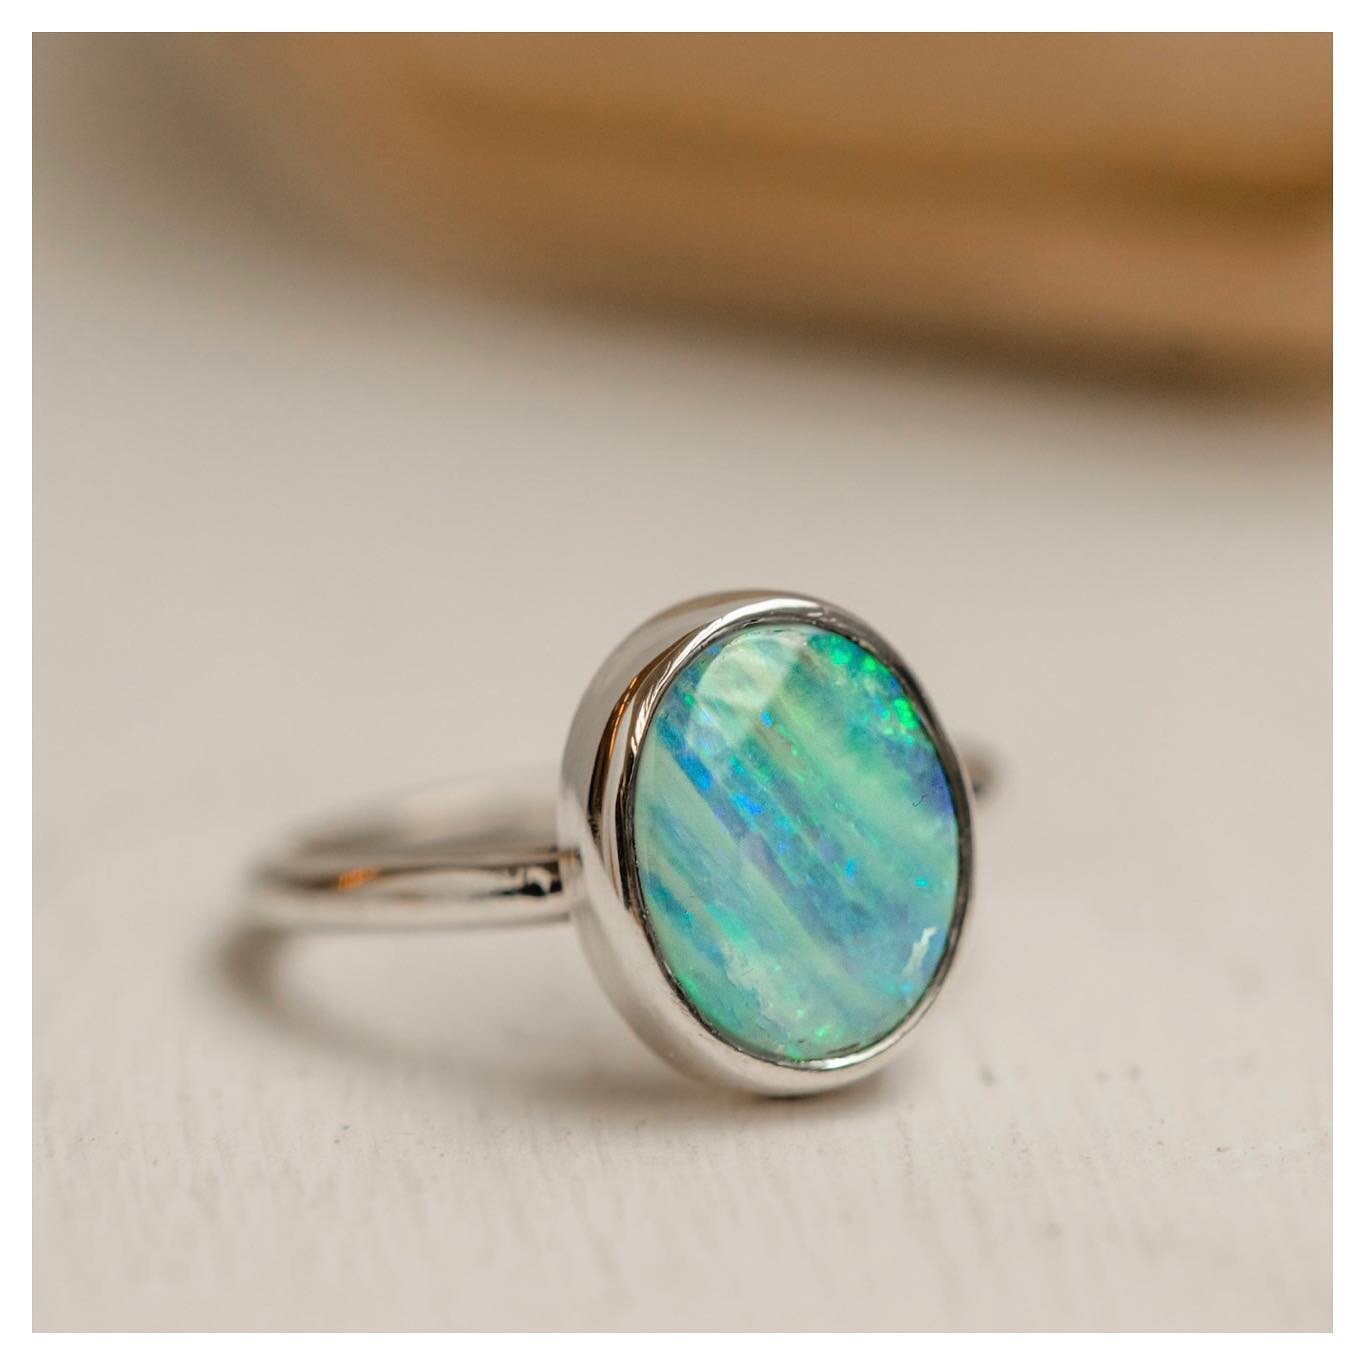 We&rsquo;ve just launched our first lapidary workshop! You get the opportunity to explore our extensive selection of raw Australian opals, picking out the one that truly speaks to you. You&rsquo;ll have the chance to shape and polish your chosen gem,